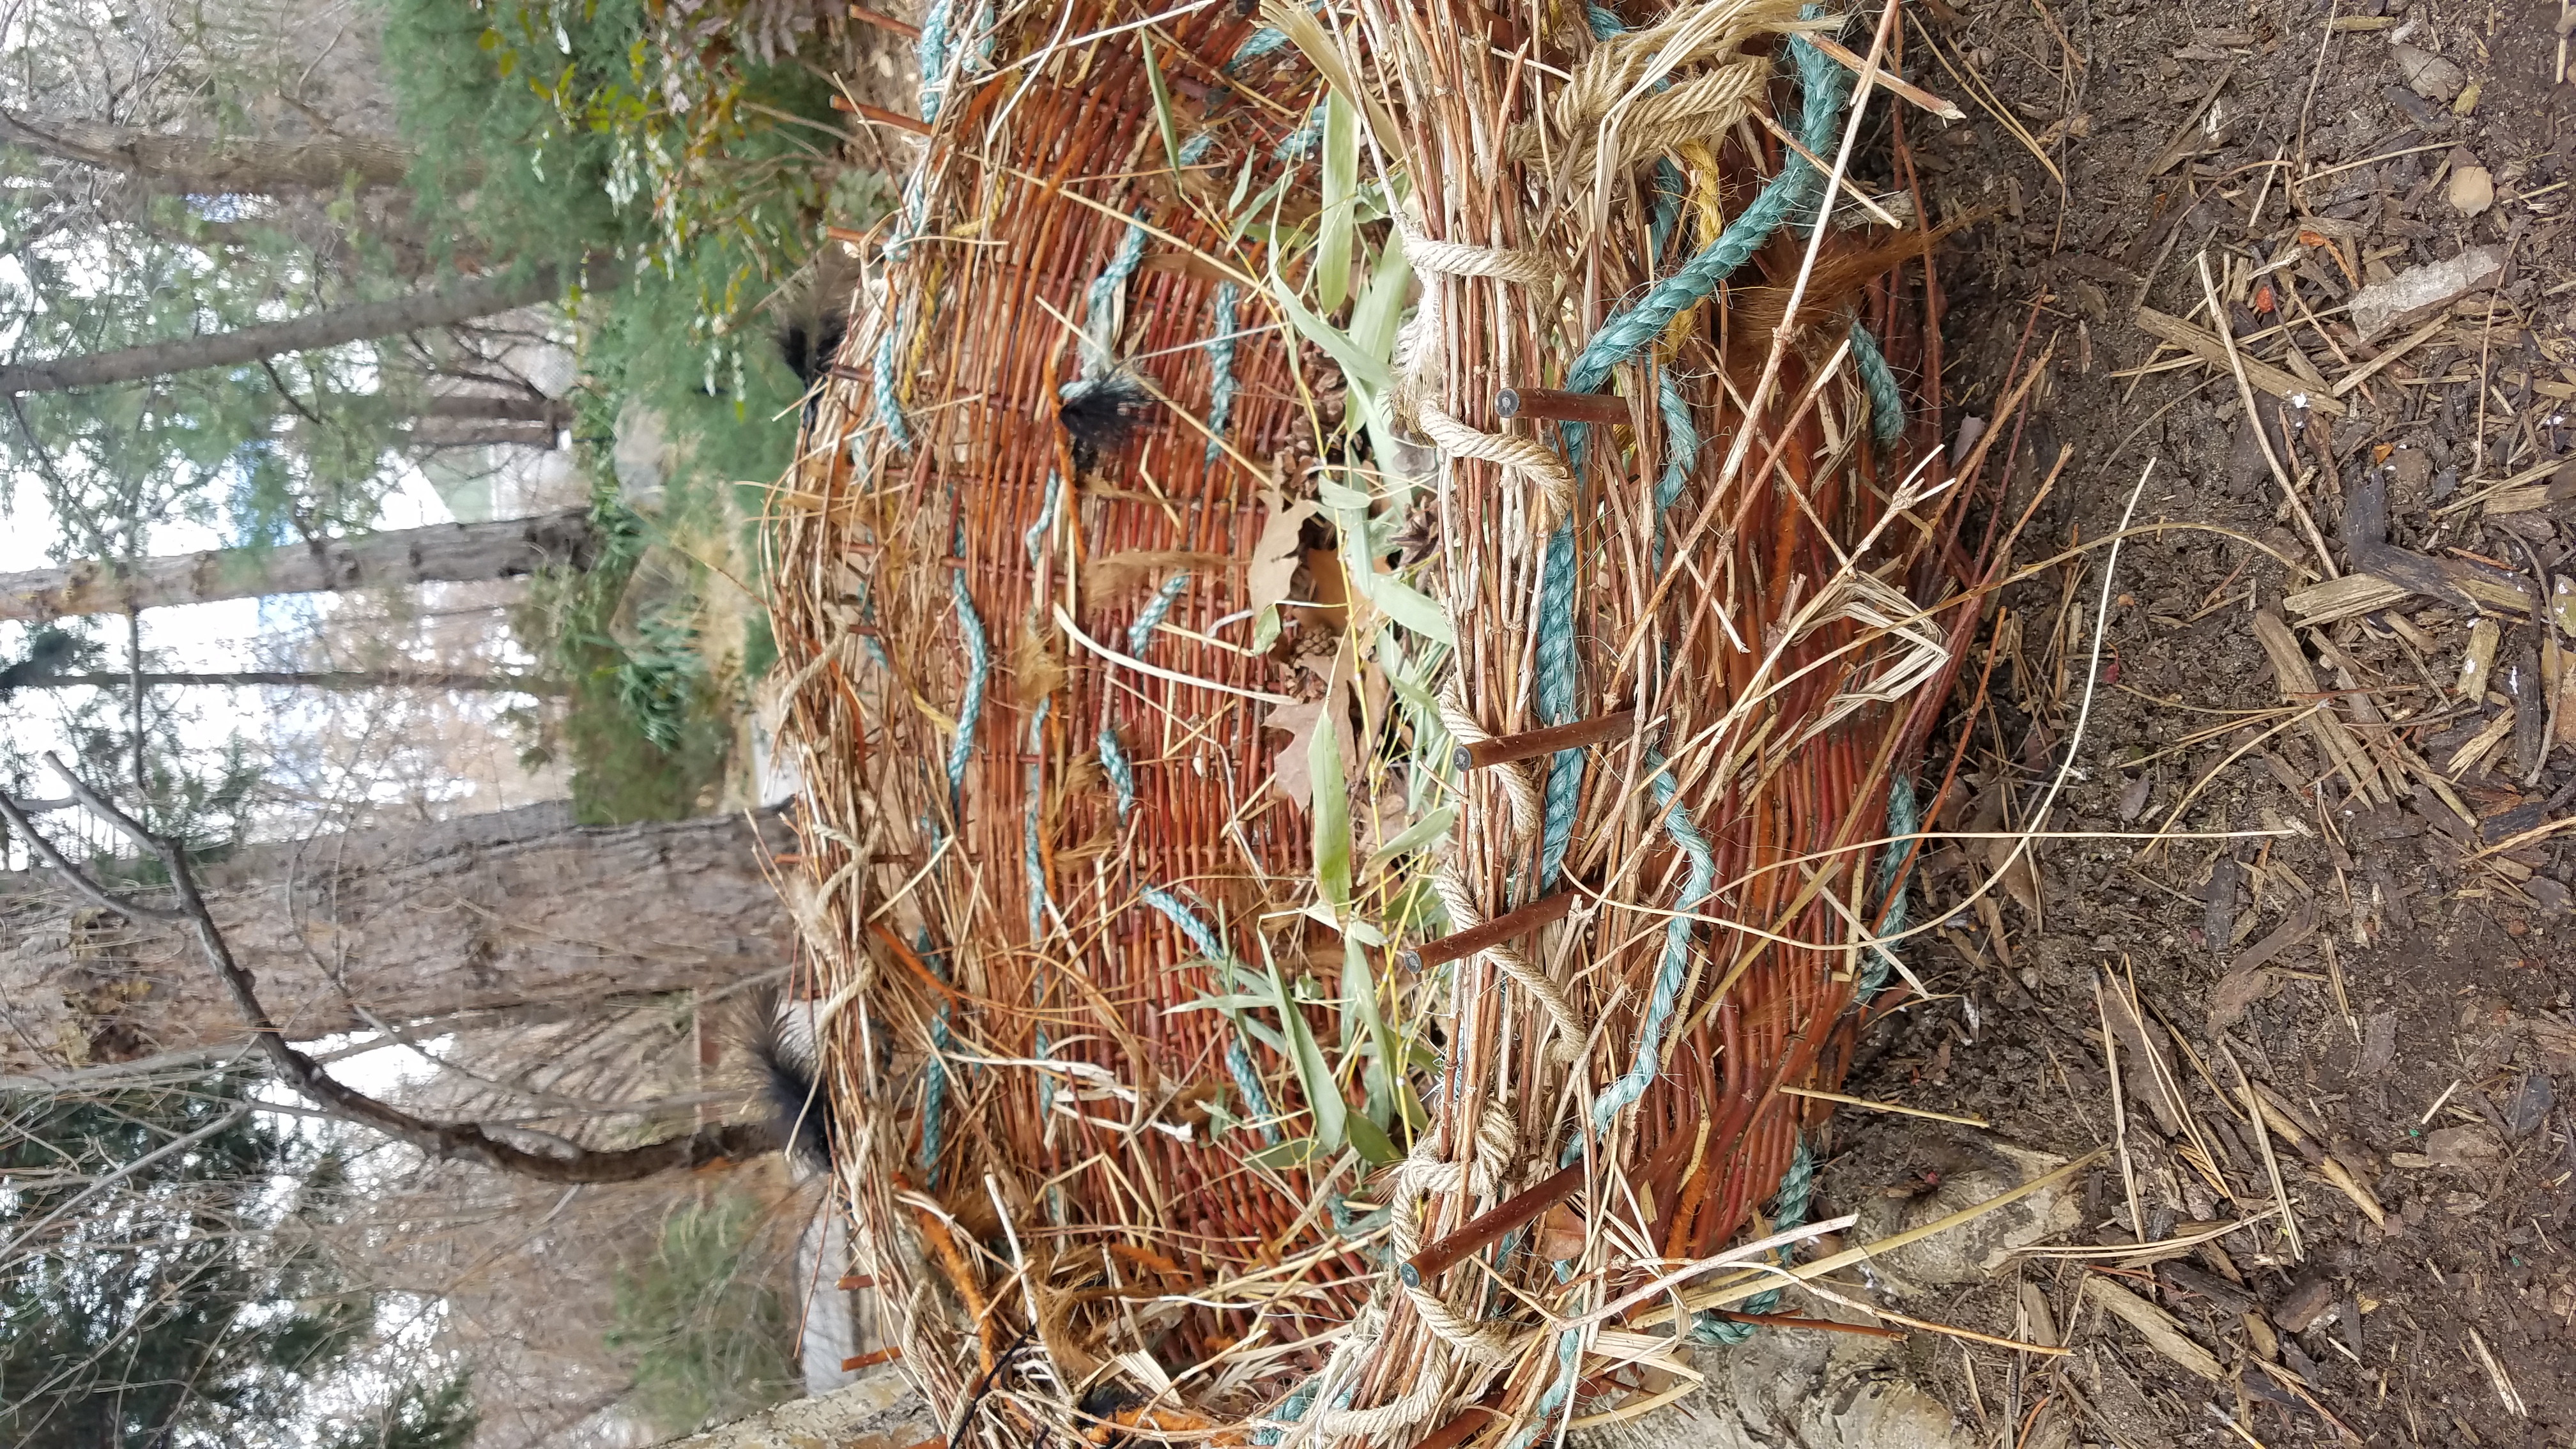 A close-up view of the handwoven nest on display in Songbird Garden.